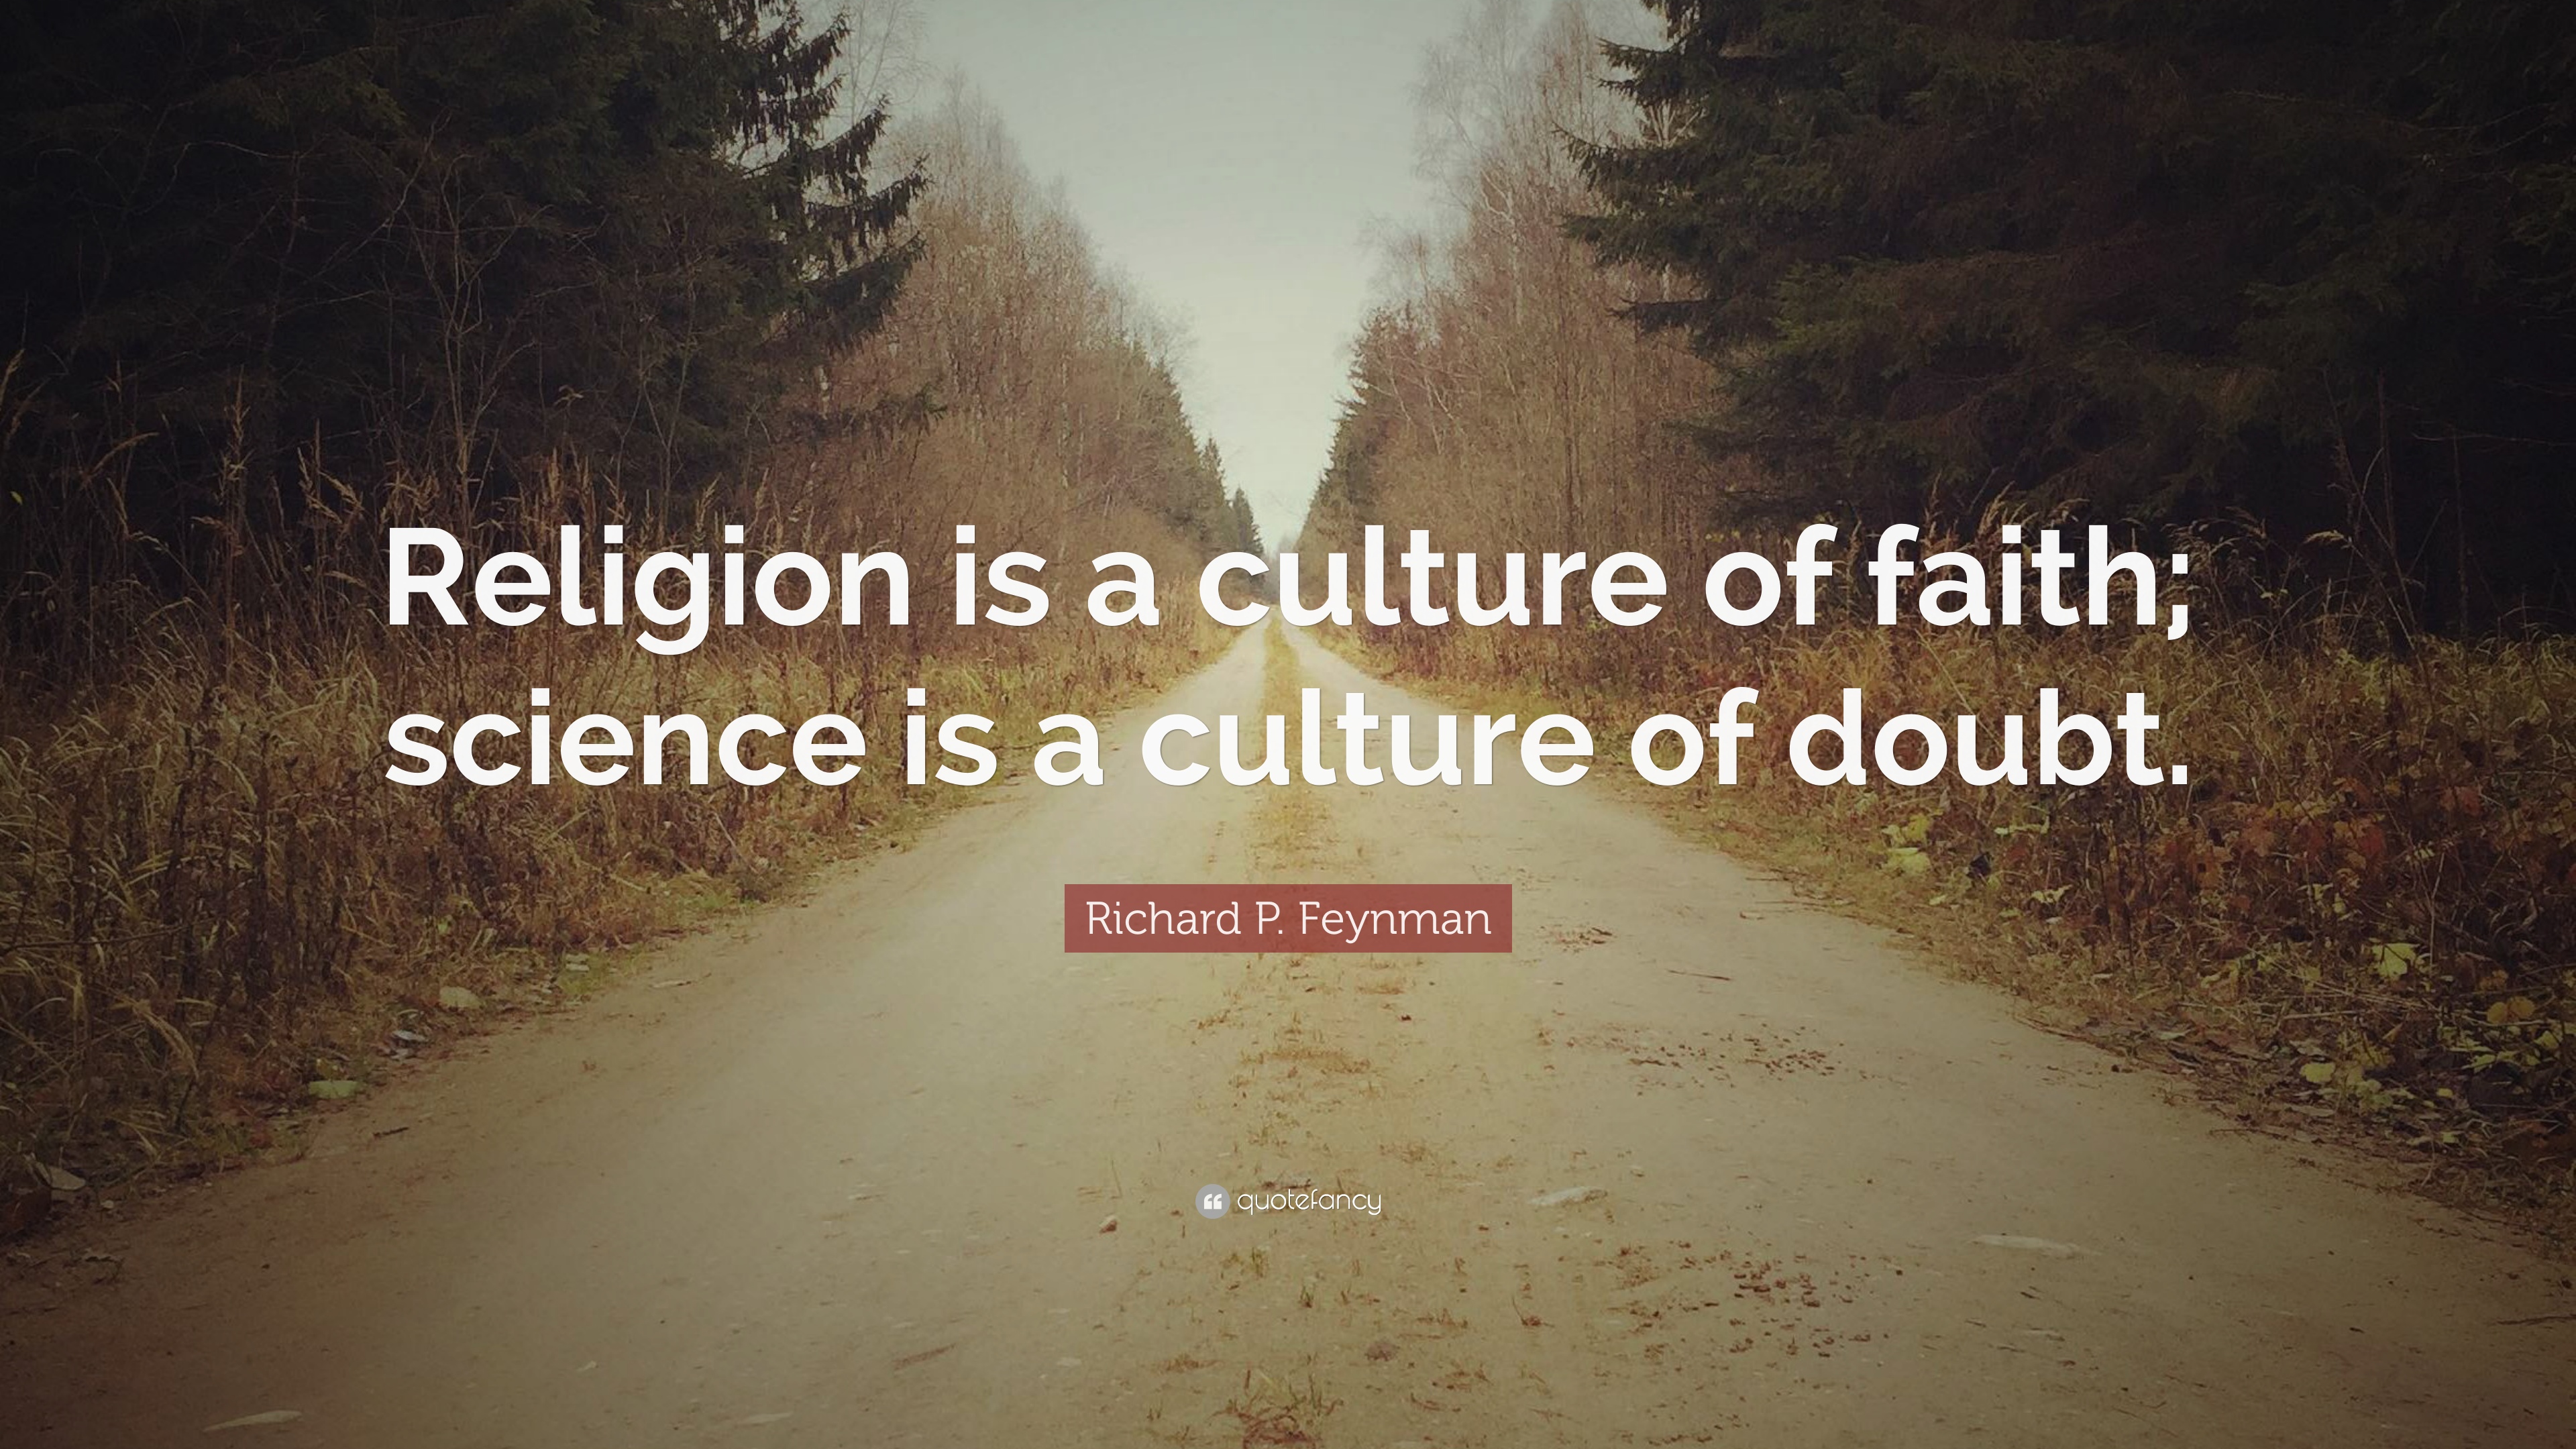 Richard P. Feynman Quote: “Religion is a culture of faith; science